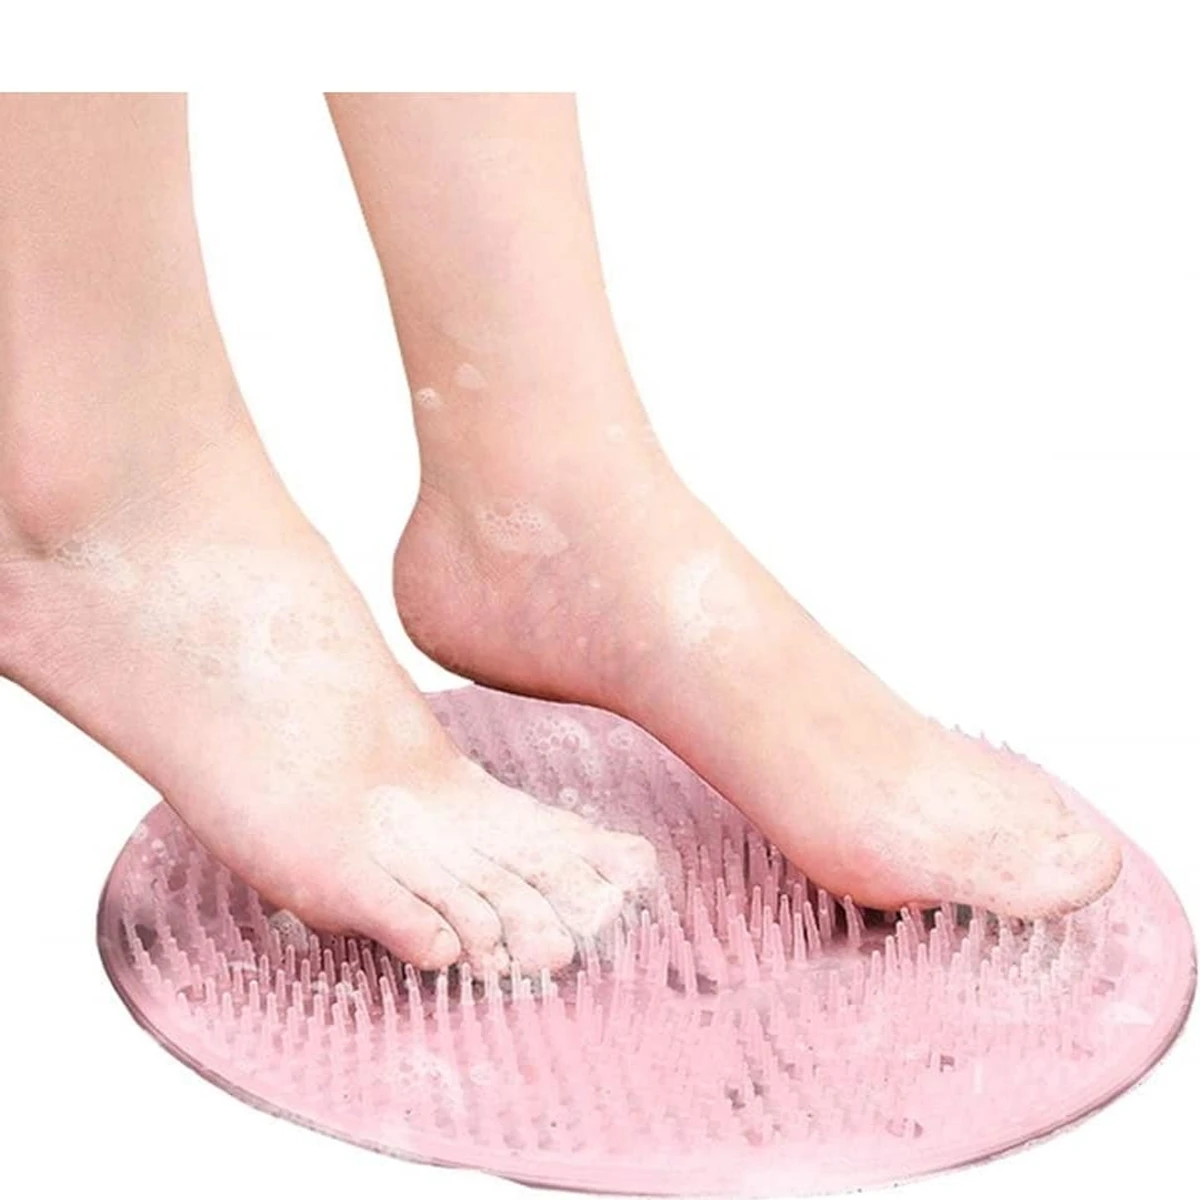 SoulQ Foot Scrubber Massager Silicome Back Foot Brush Cleaner Shower Mat,Exfoliation Pad with Non-Slip Suction Cups,Remove Foot Dead Skin Foot Care Reduces Foot Pain